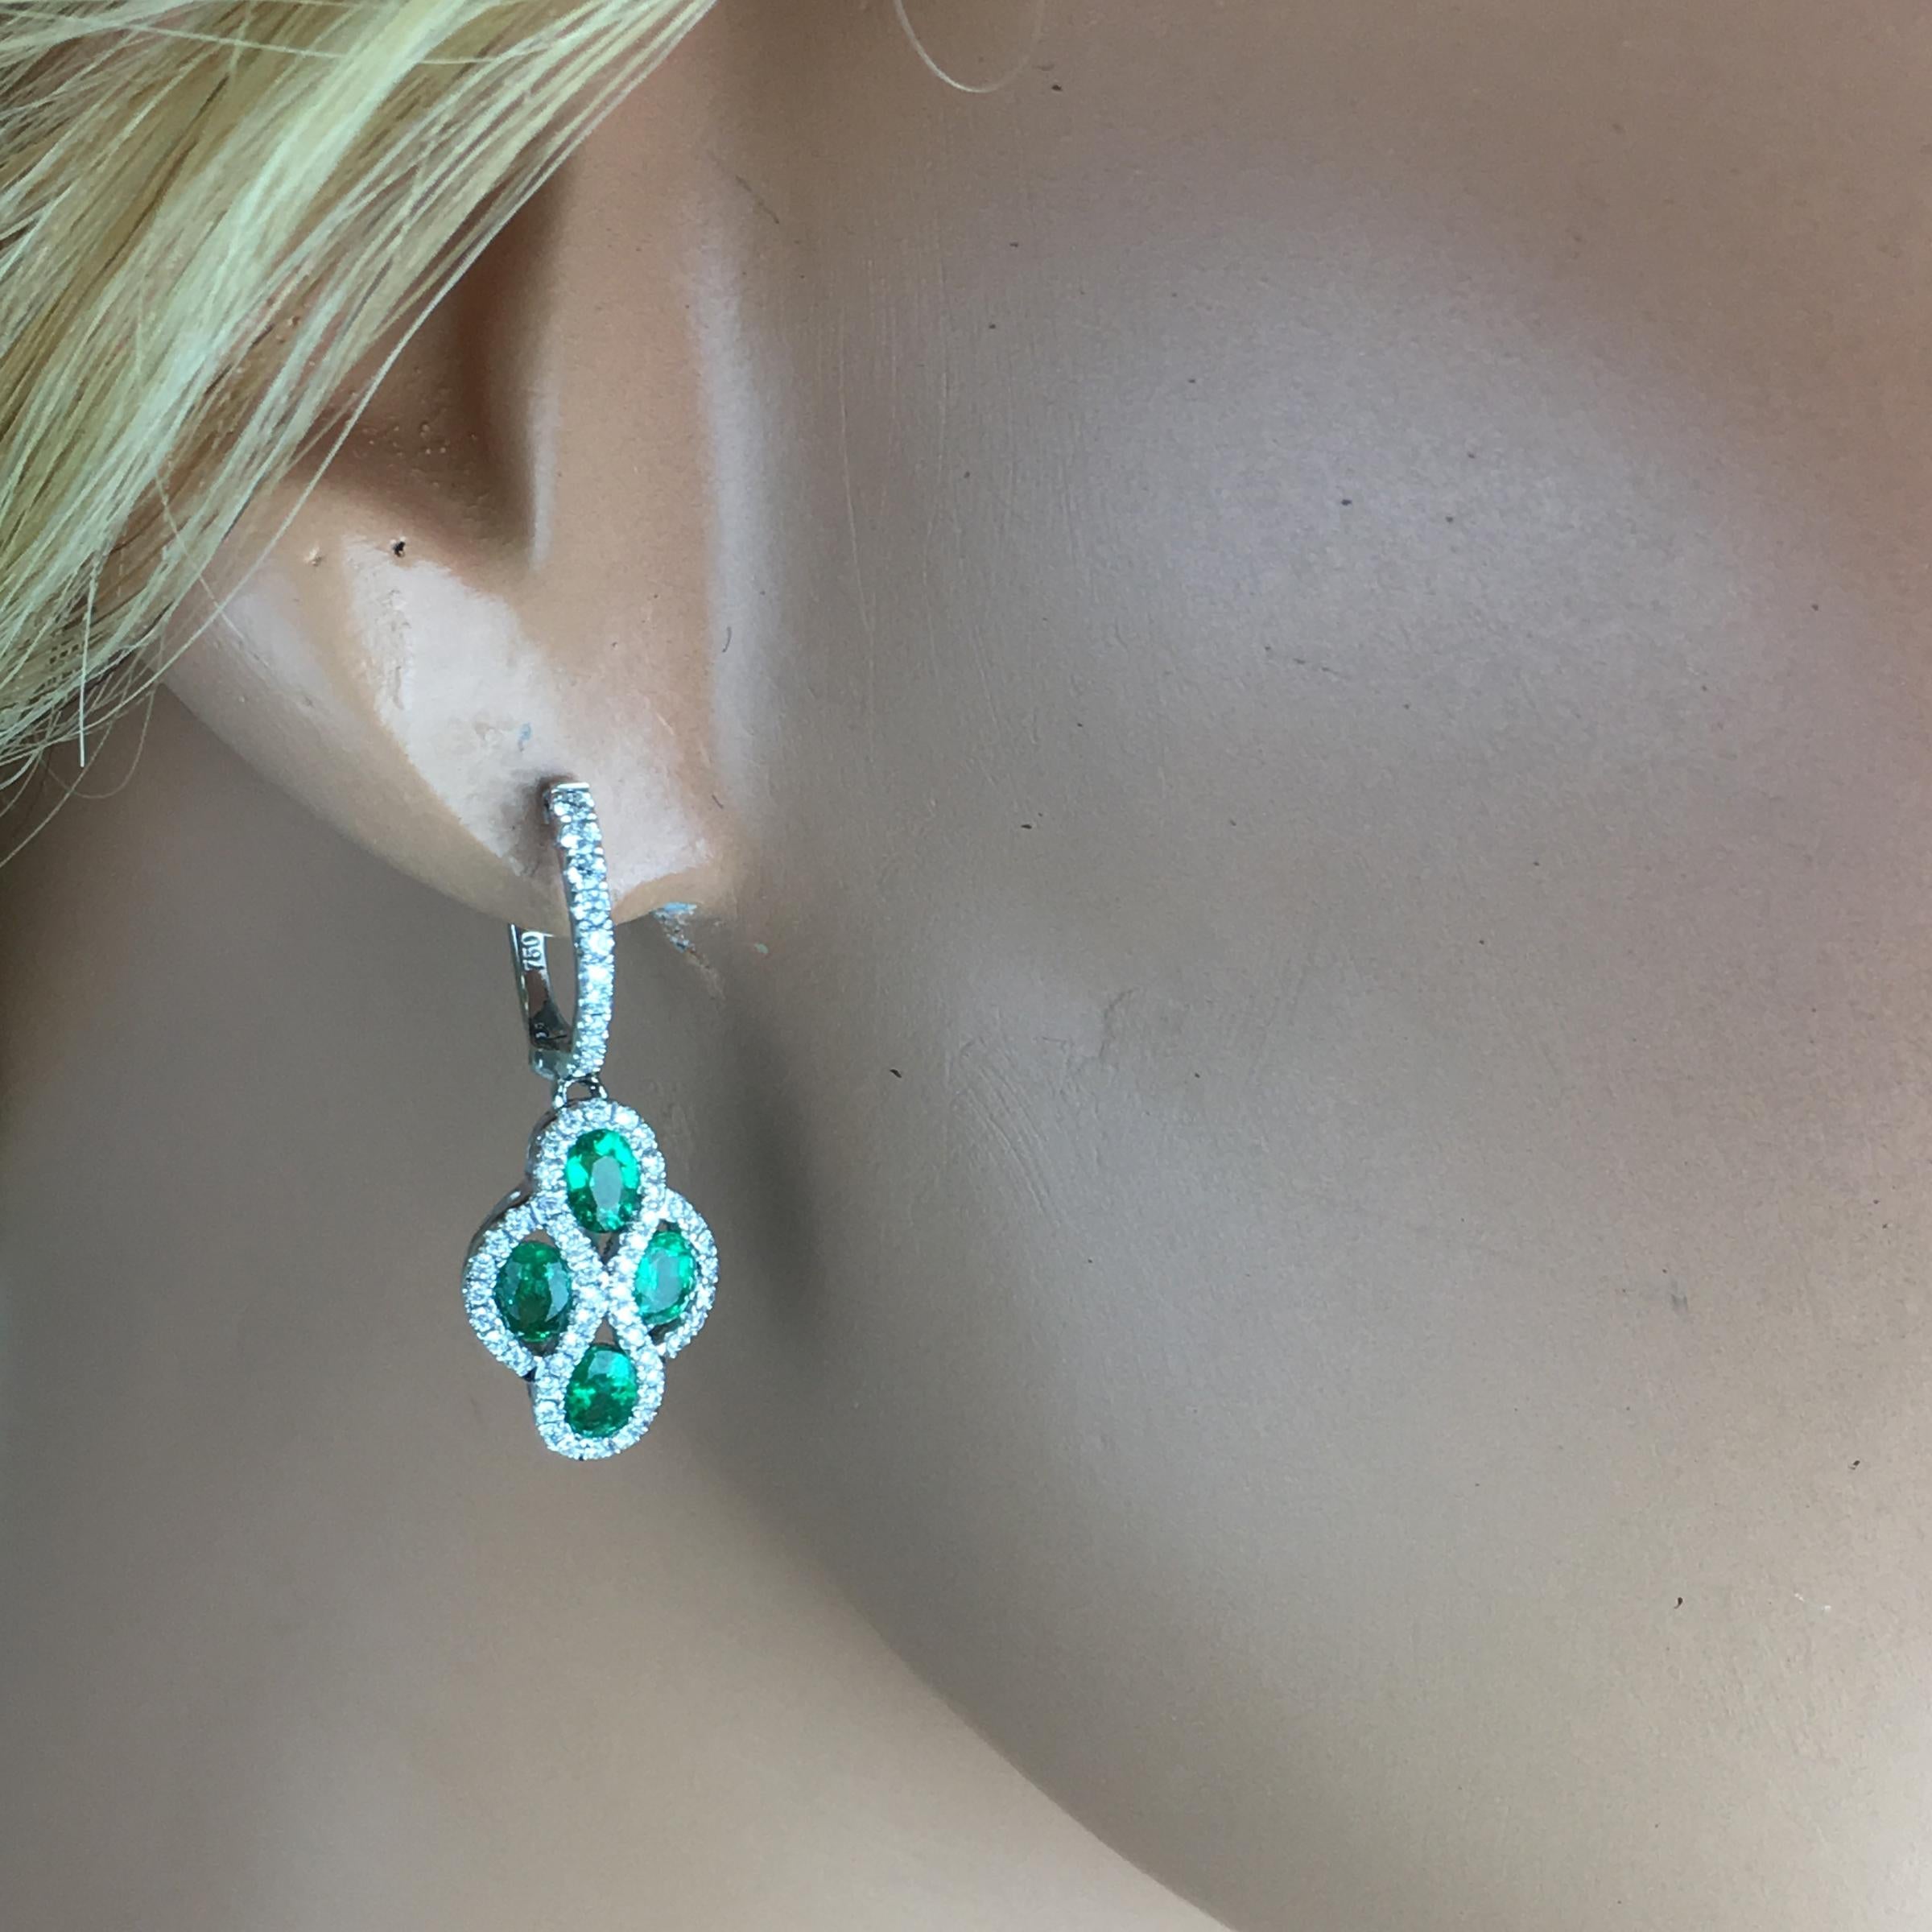 These lever-back dangle hoop earrings feature four oval cut fine emeralds (total weight 1.23 carats) surrounded by round white diamonds. Additional round diamonds lead up the front face of the hoop, bringing the total diamond weight to 0.48